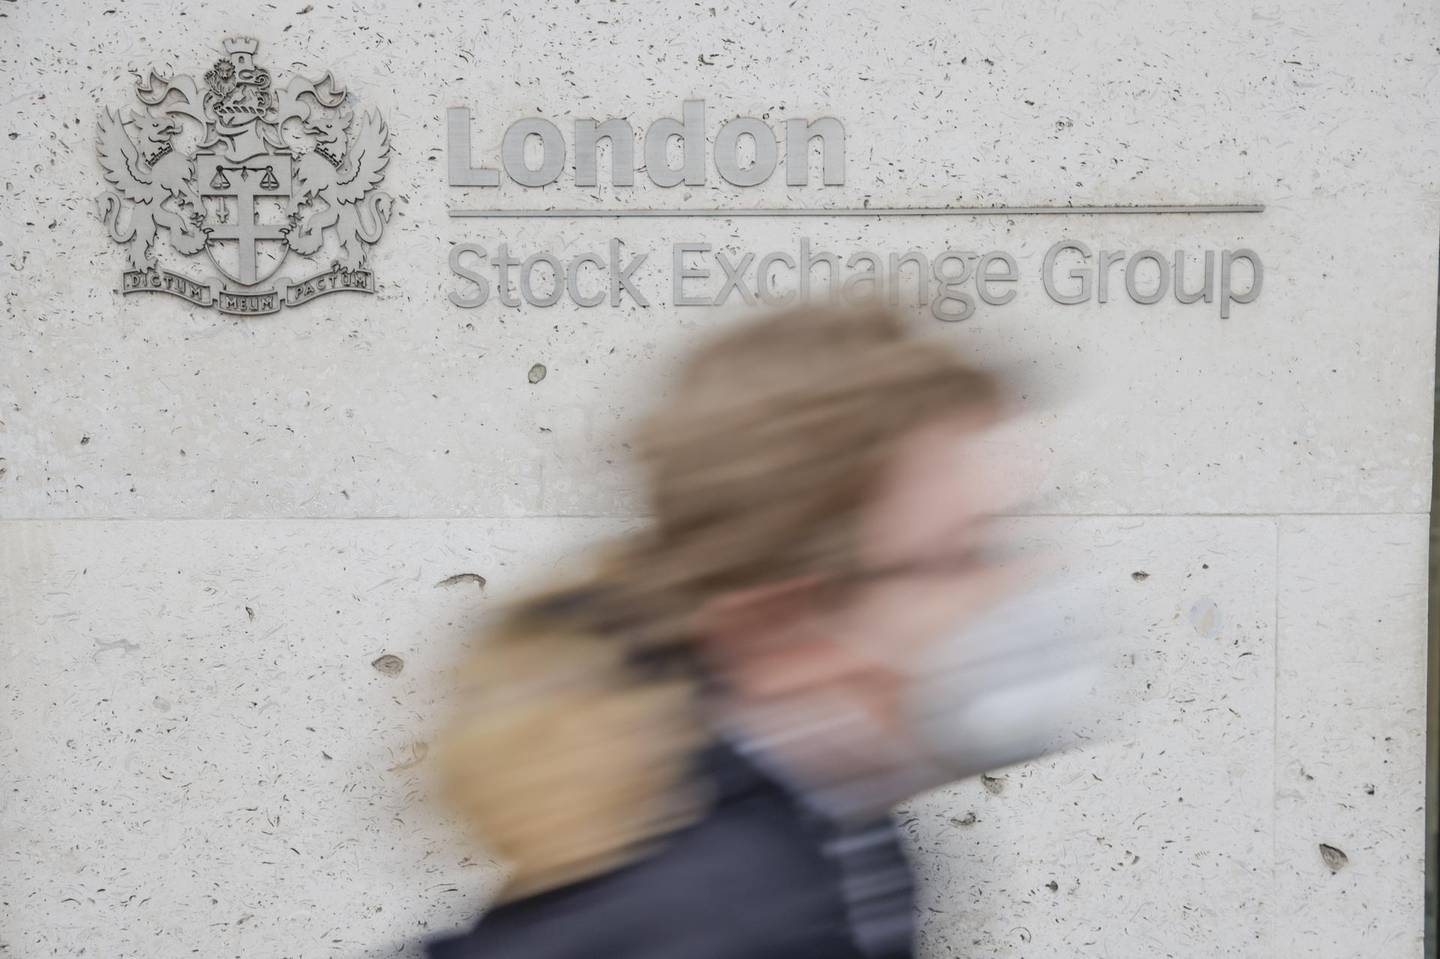 A pedestrian passes the London Stock Exchange in the square mile financial district of the City of London, U.K., on Monday, Jan. 4, 2021. Britain's long-awaited trade deal with the European Union still leaves many questions unanswered for the world's biggest banks, trading venues and money managers as they prepare for a rupture in the region's financial system. Photographer: Jason Alden/Bloomberg